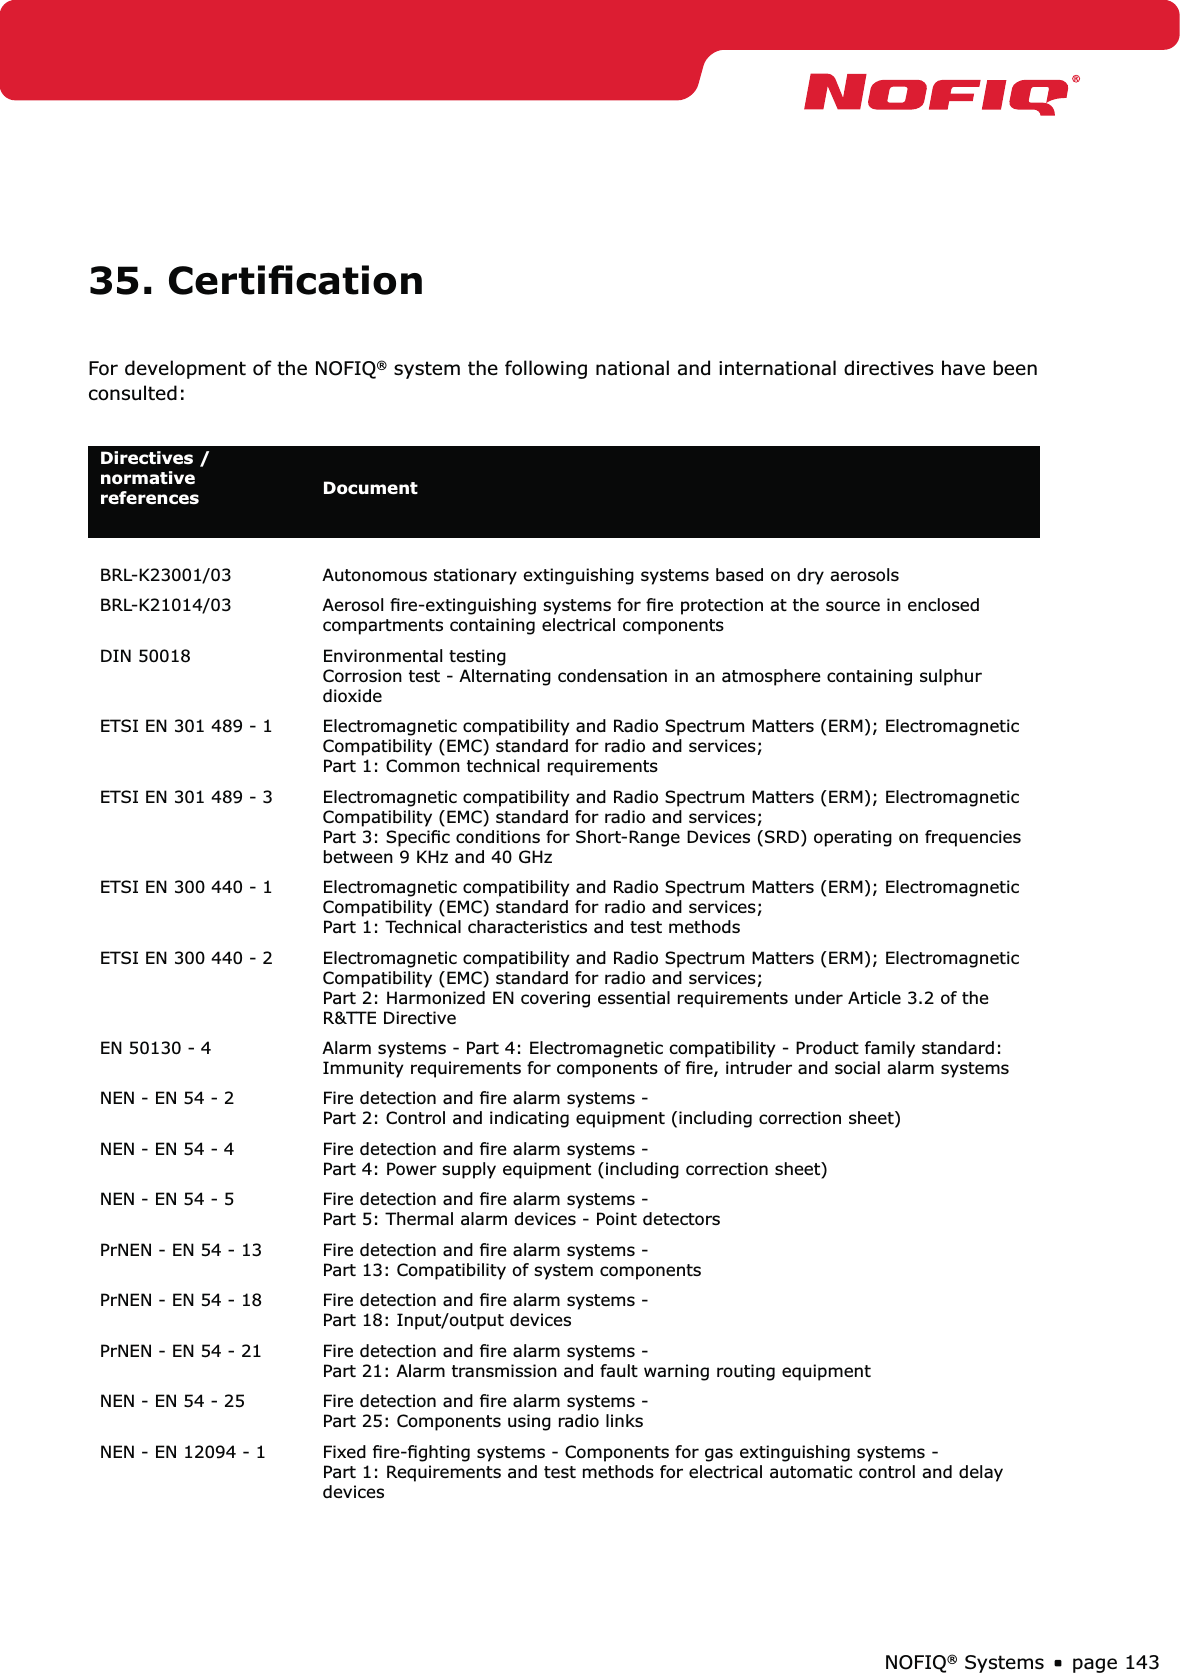 page 143NOFIQ® Systems35. CertiﬁcationFor development of the NOFIQ® system the following national and international directives have been consulted:Directives / normative references DocumentBRL-K23001/03 Autonomous stationary extinguishing systems based on dry aerosolsBRL-K21014/03 Aerosol ﬁre-extinguishing systems for ﬁre protection at the source in enclosed compartments containing electrical componentsDIN 50018 Environmental testing Corrosion test - Alternating condensation in an atmosphere containing sulphur dioxide ETSI EN 301 489 - 1 Electromagnetic compatibility and Radio Spectrum Matters (ERM); Electromagnetic Compatibility (EMC) standard for radio and services;  Part 1: Common technical requirementsETSI EN 301 489 - 3 Electromagnetic compatibility and Radio Spectrum Matters (ERM); Electromagnetic Compatibility (EMC) standard for radio and services;  Part 3: Speciﬁc conditions for Short-Range Devices (SRD) operating on frequencies between 9 KHz and 40 GHzETSI EN 300 440 - 1 Electromagnetic compatibility and Radio Spectrum Matters (ERM); Electromagnetic Compatibility (EMC) standard for radio and services;  Part 1: Technical characteristics and test methodsETSI EN 300 440 - 2 Electromagnetic compatibility and Radio Spectrum Matters (ERM); Electromagnetic Compatibility (EMC) standard for radio and services;  Part 2: Harmonized EN covering essential requirements under Article 3.2 of the R&amp;TTE DirectiveEN 50130 - 4 Alarm systems - Part 4: Electromagnetic compatibility - Product family standard: Immunity requirements for components of ﬁre, intruder and social alarm systemsNEN - EN 54 - 2 Fire detection and ﬁre alarm systems -  Part 2: Control and indicating equipment (including correction sheet)NEN - EN 54 - 4 Fire detection and ﬁre alarm systems -  Part 4: Power supply equipment (including correction sheet)NEN - EN 54 - 5 Fire detection and ﬁre alarm systems -  Part 5: Thermal alarm devices - Point detectors PrNEN - EN 54 - 13 Fire detection and ﬁre alarm systems -  Part 13: Compatibility of system components PrNEN - EN 54 - 18 Fire detection and ﬁre alarm systems -  Part 18: Input/output devicesPrNEN - EN 54 - 21 Fire detection and ﬁre alarm systems -  Part 21: Alarm transmission and fault warning routing equipmentNEN - EN 54 - 25 Fire detection and ﬁre alarm systems -  Part 25: Components using radio linksNEN - EN 12094 - 1 Fixed ﬁre-ﬁghting systems - Components for gas extinguishing systems -  Part 1: Requirements and test methods for electrical automatic control and delay devices